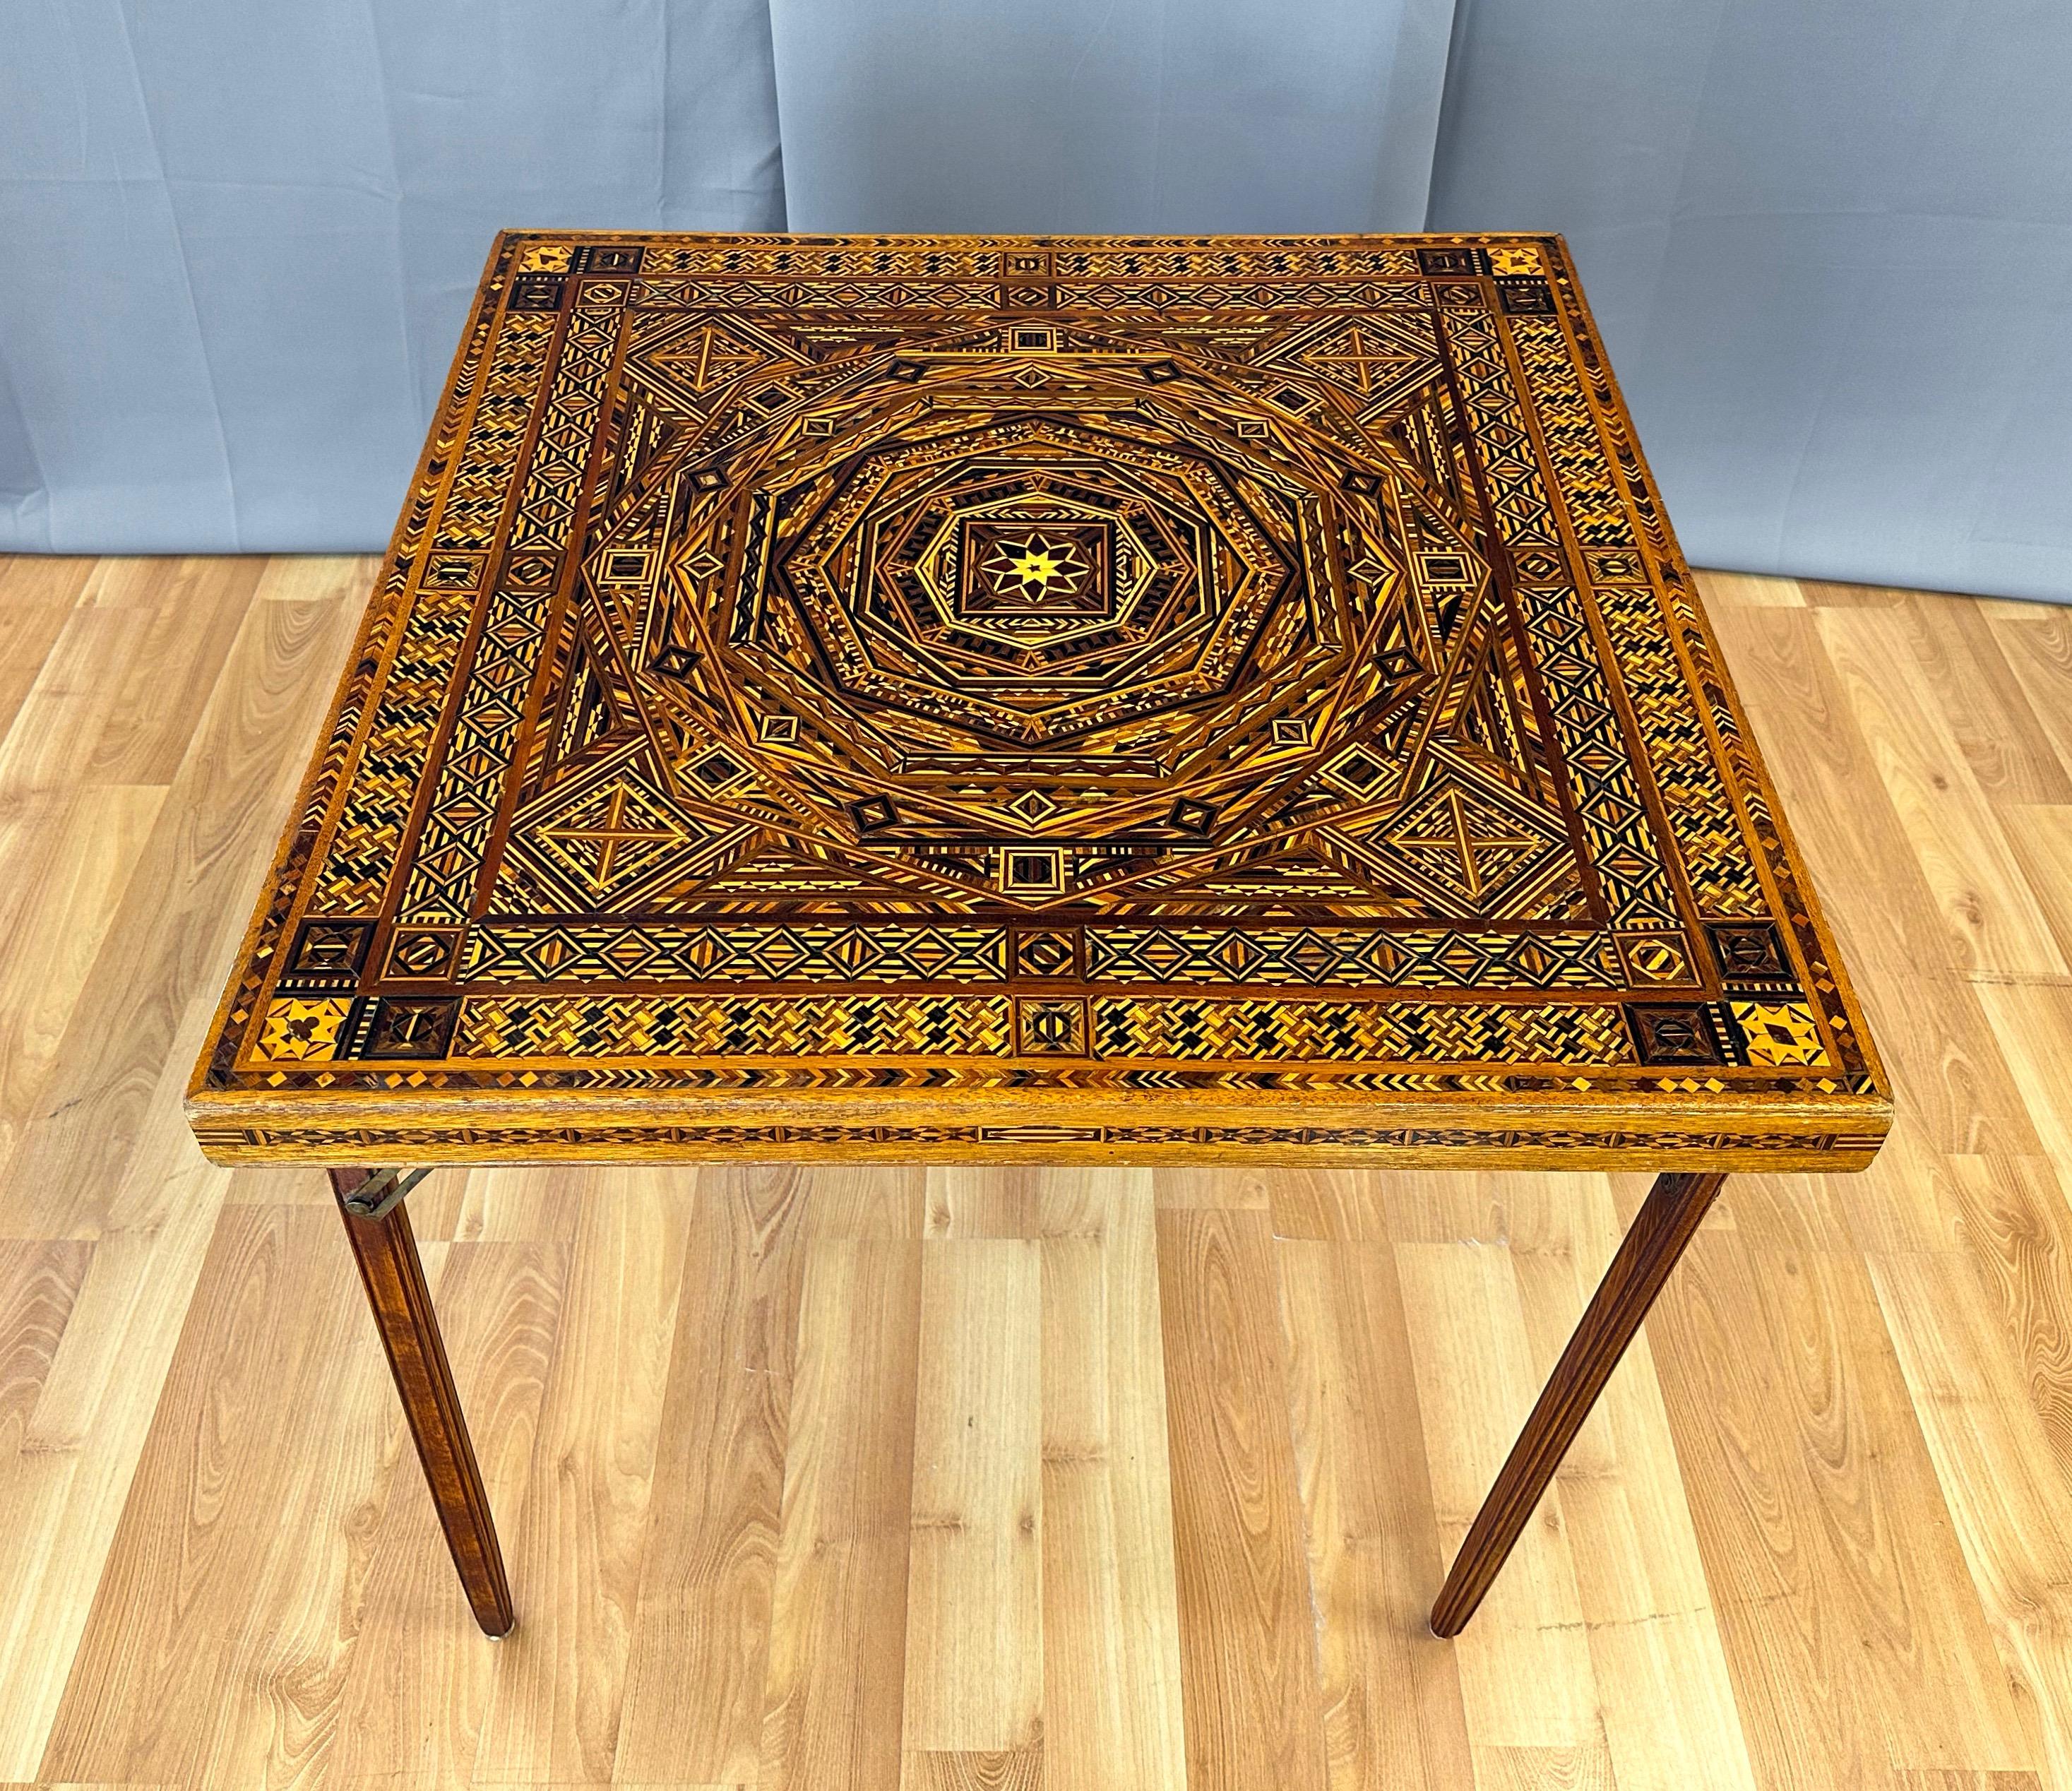 A very uncommon, exceptionally intricate, and visually transfixing 1930s Syrian or Syrian-style wood marquetry folding card table.

Top and sides feature an incredibly complex and very well-executed Damascene or Moorish geometric mosaic design